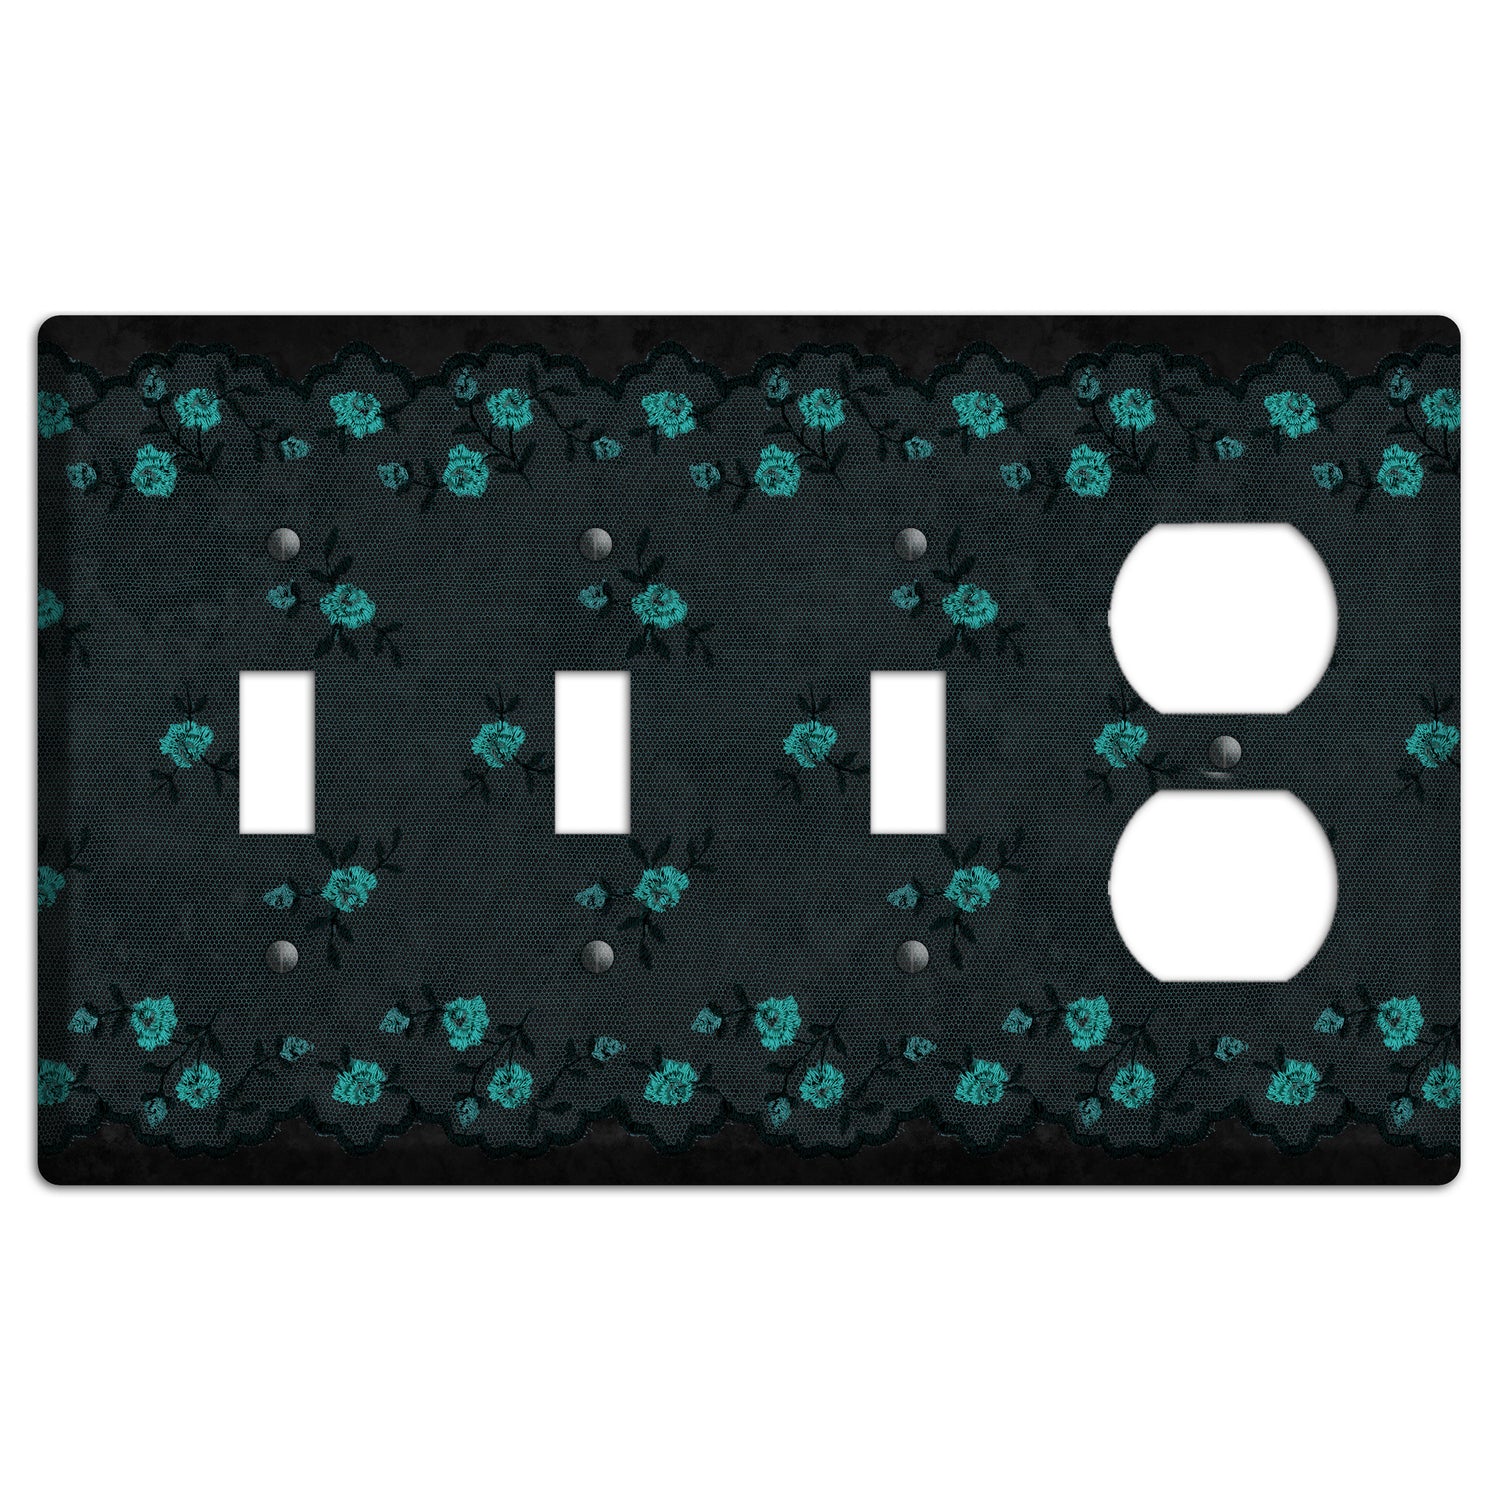 Embroidered Floral Black 3 Toggle / Duplex Wallplate